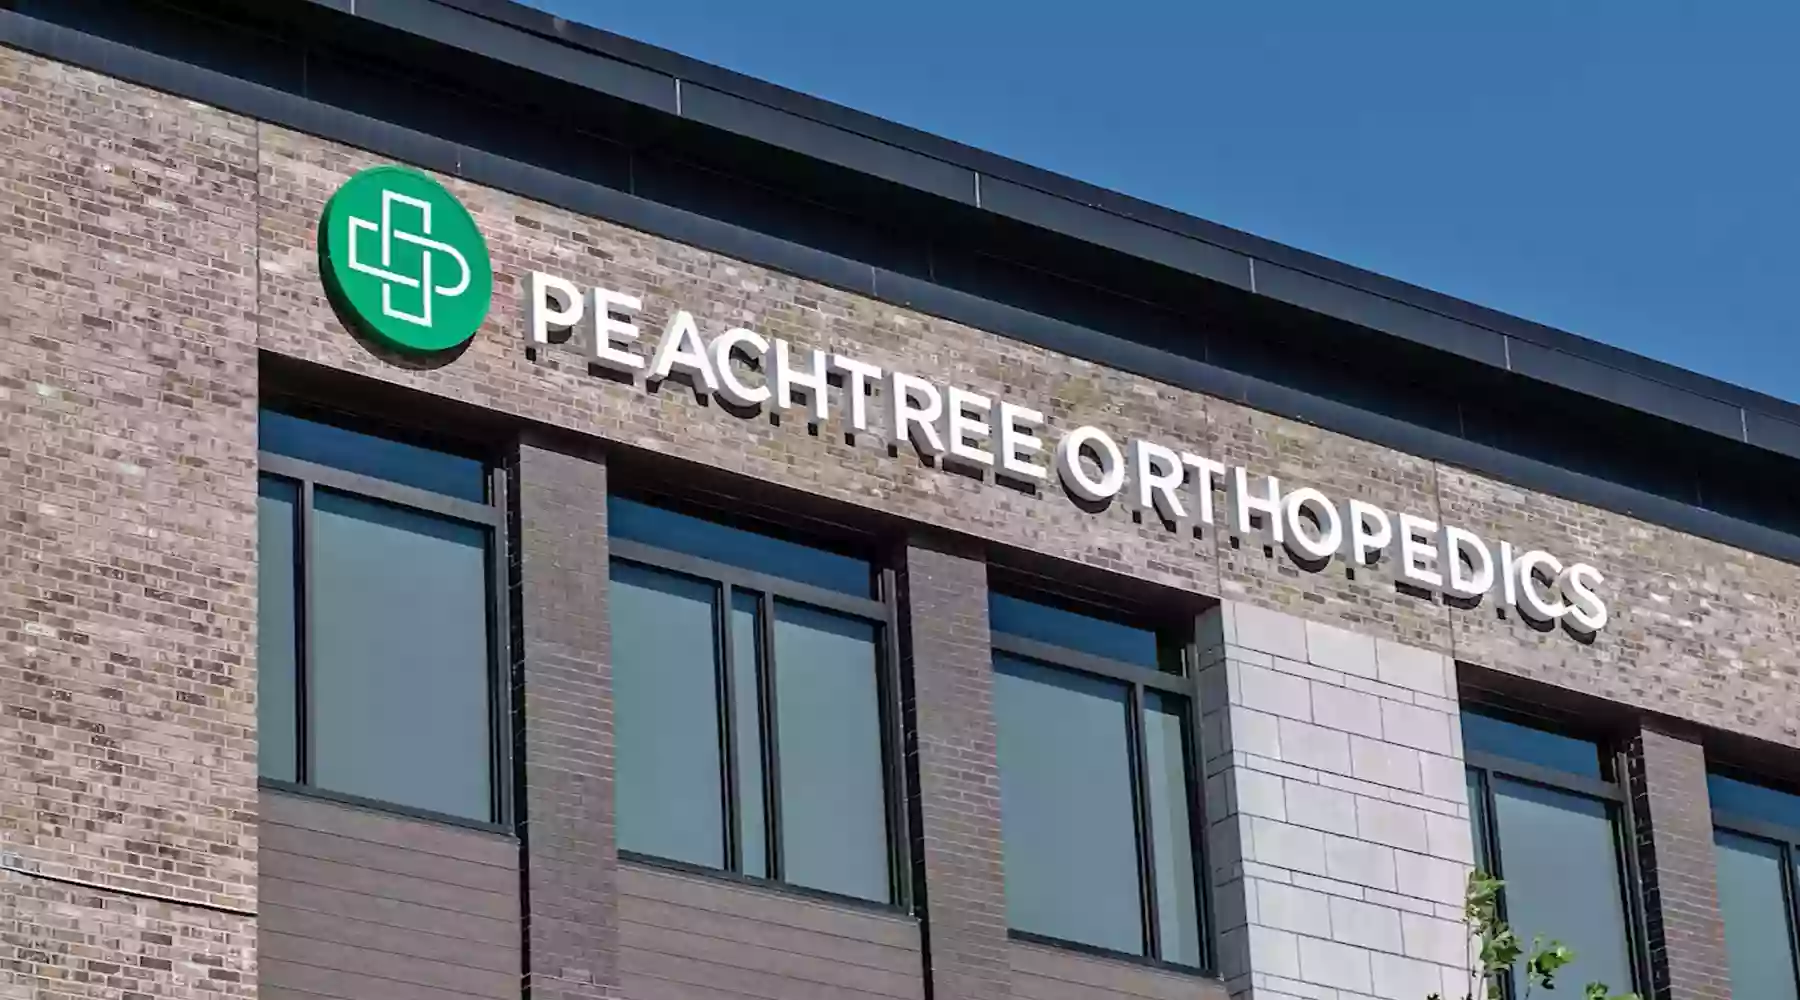 Peachtree Orthopedics | East Cobb Therapy